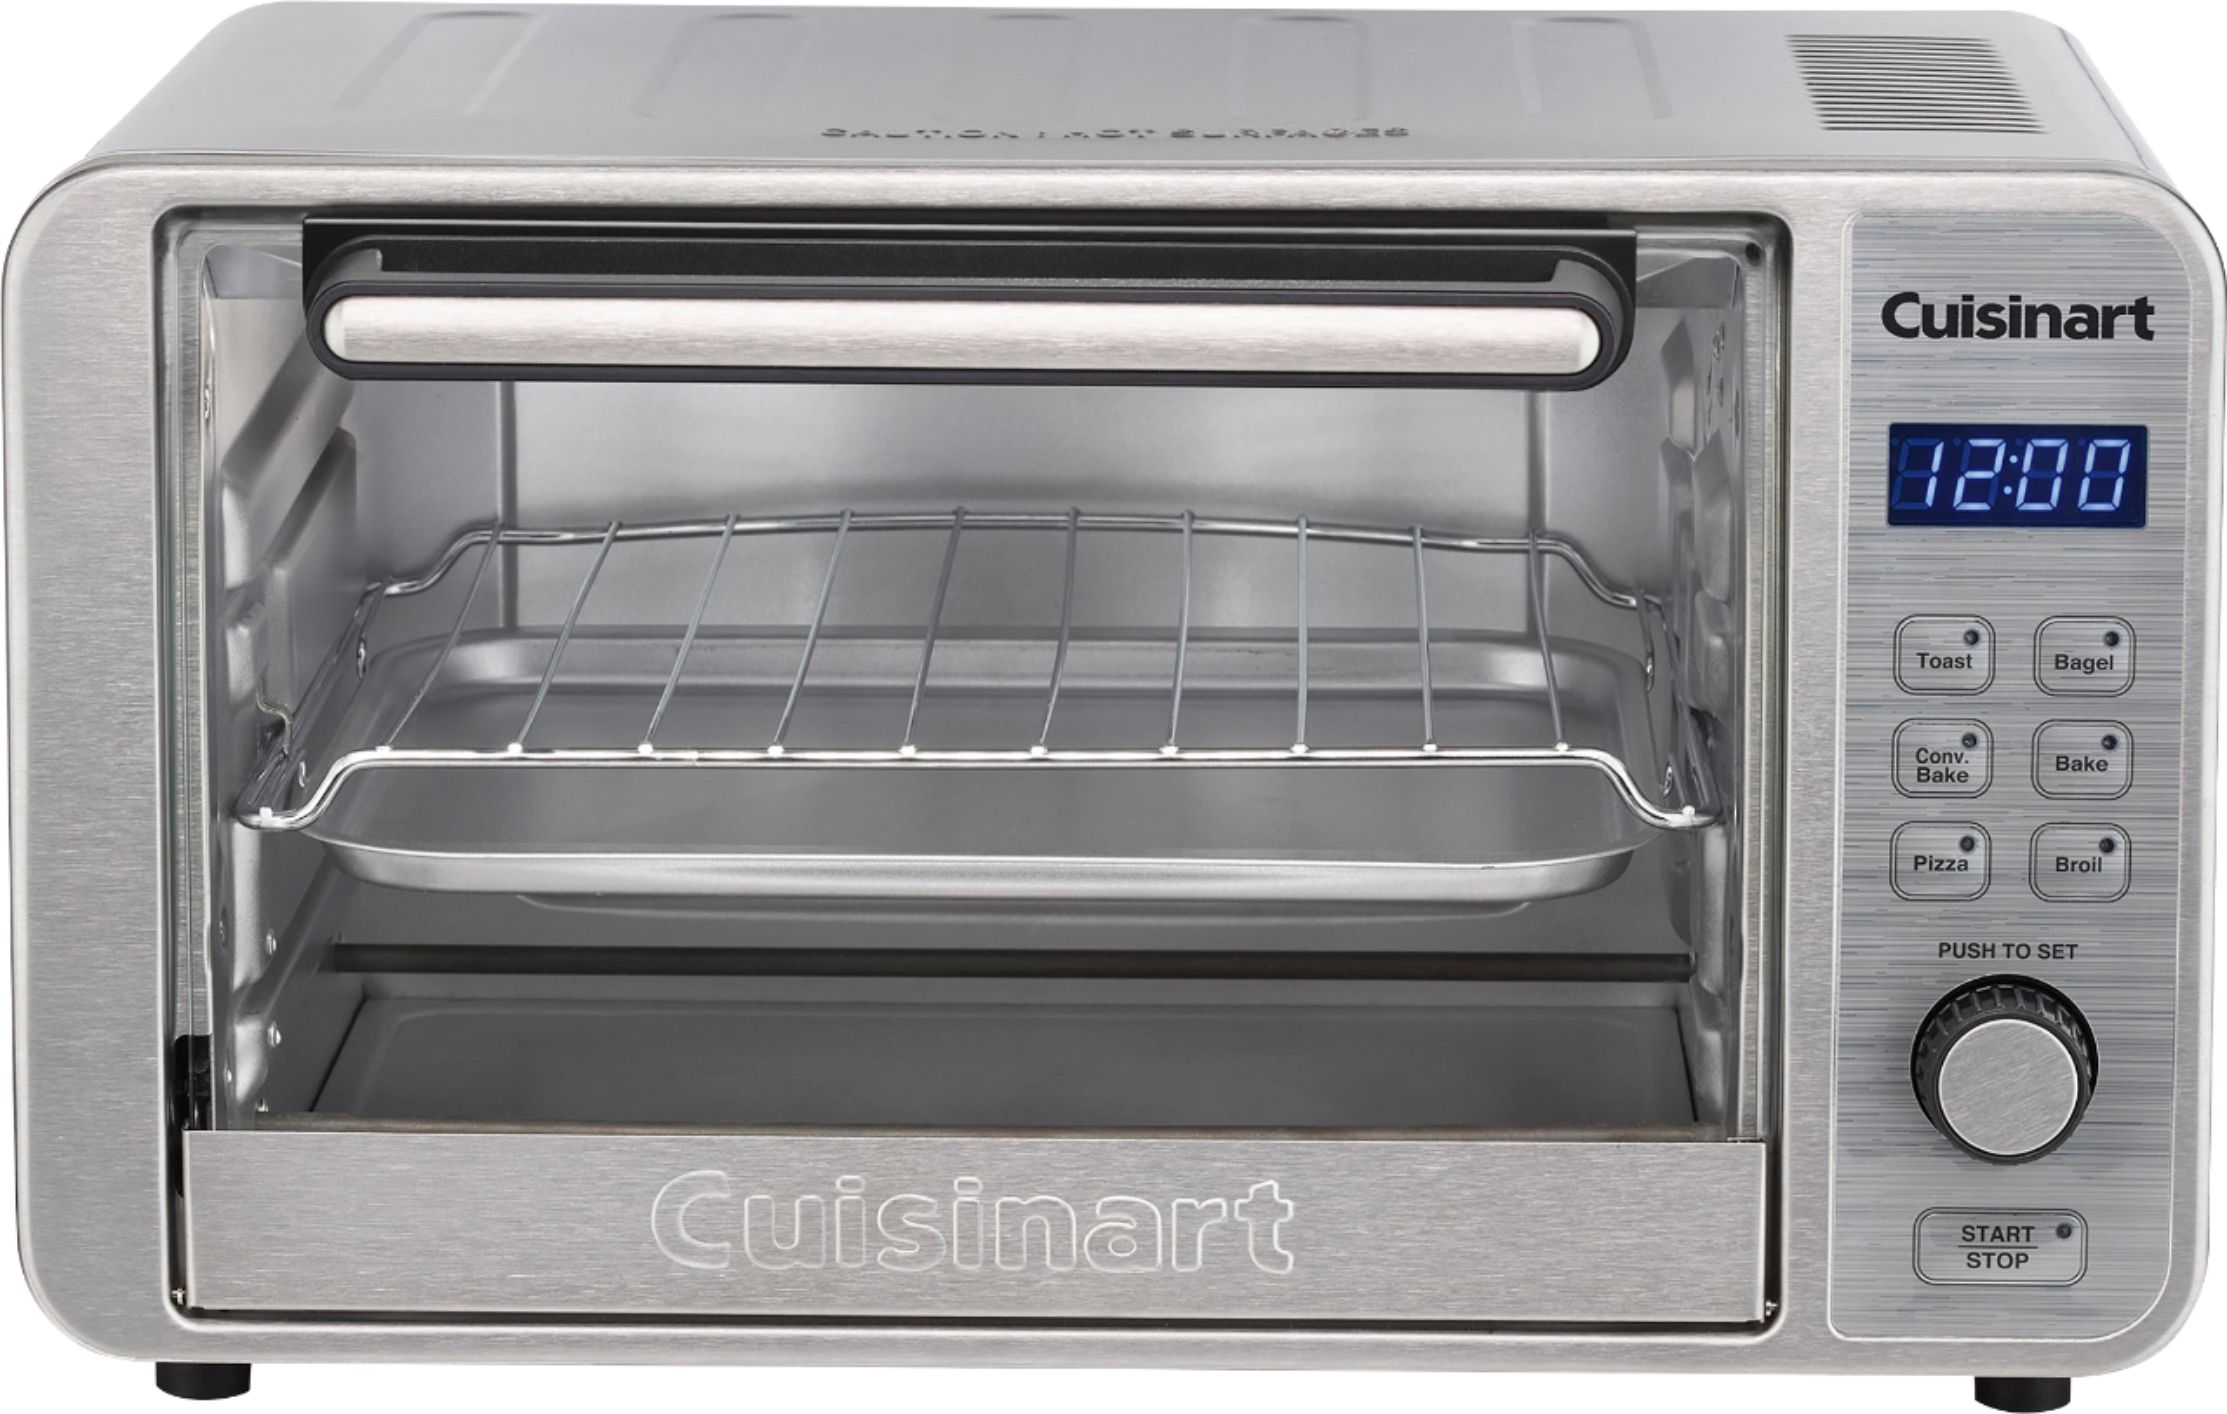 Cuisinart Convection Toaster Oven Review 2020